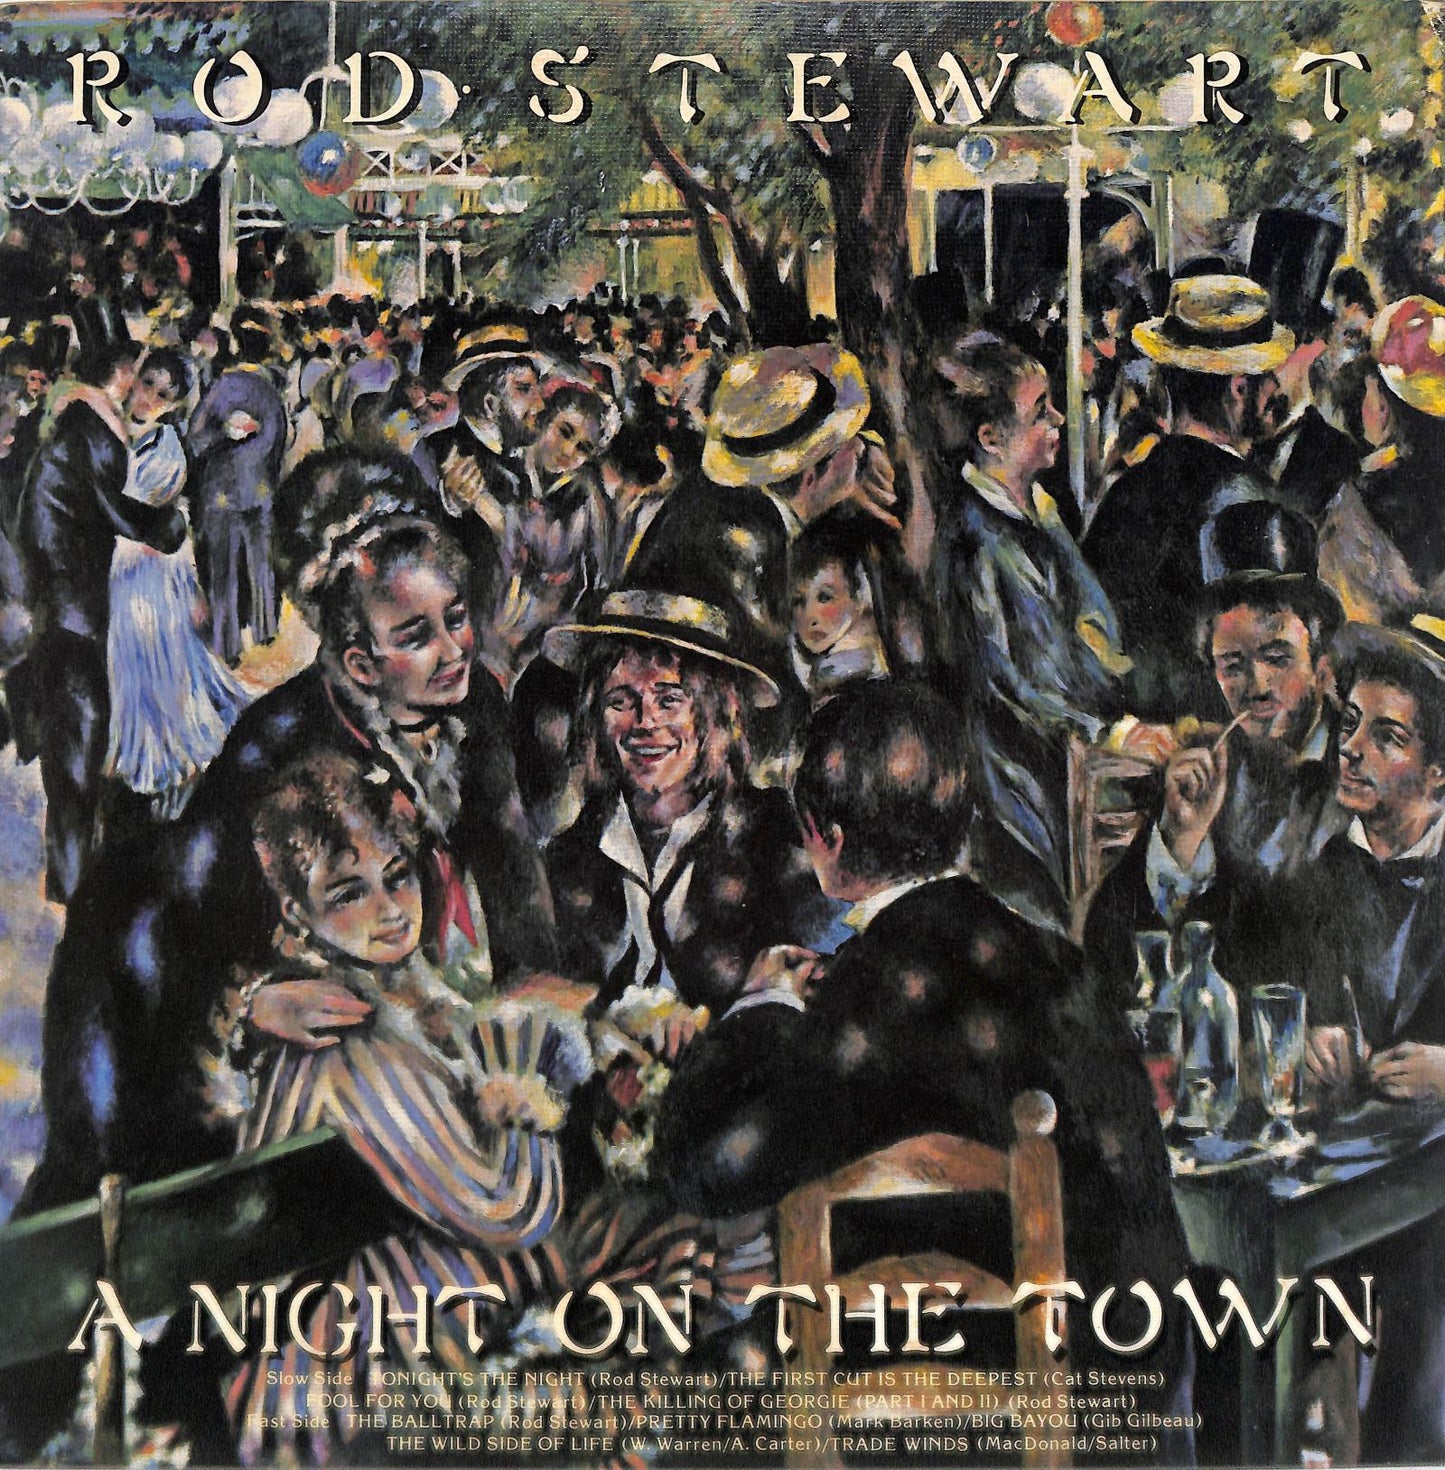 ROD STEWART - A Night On The Town